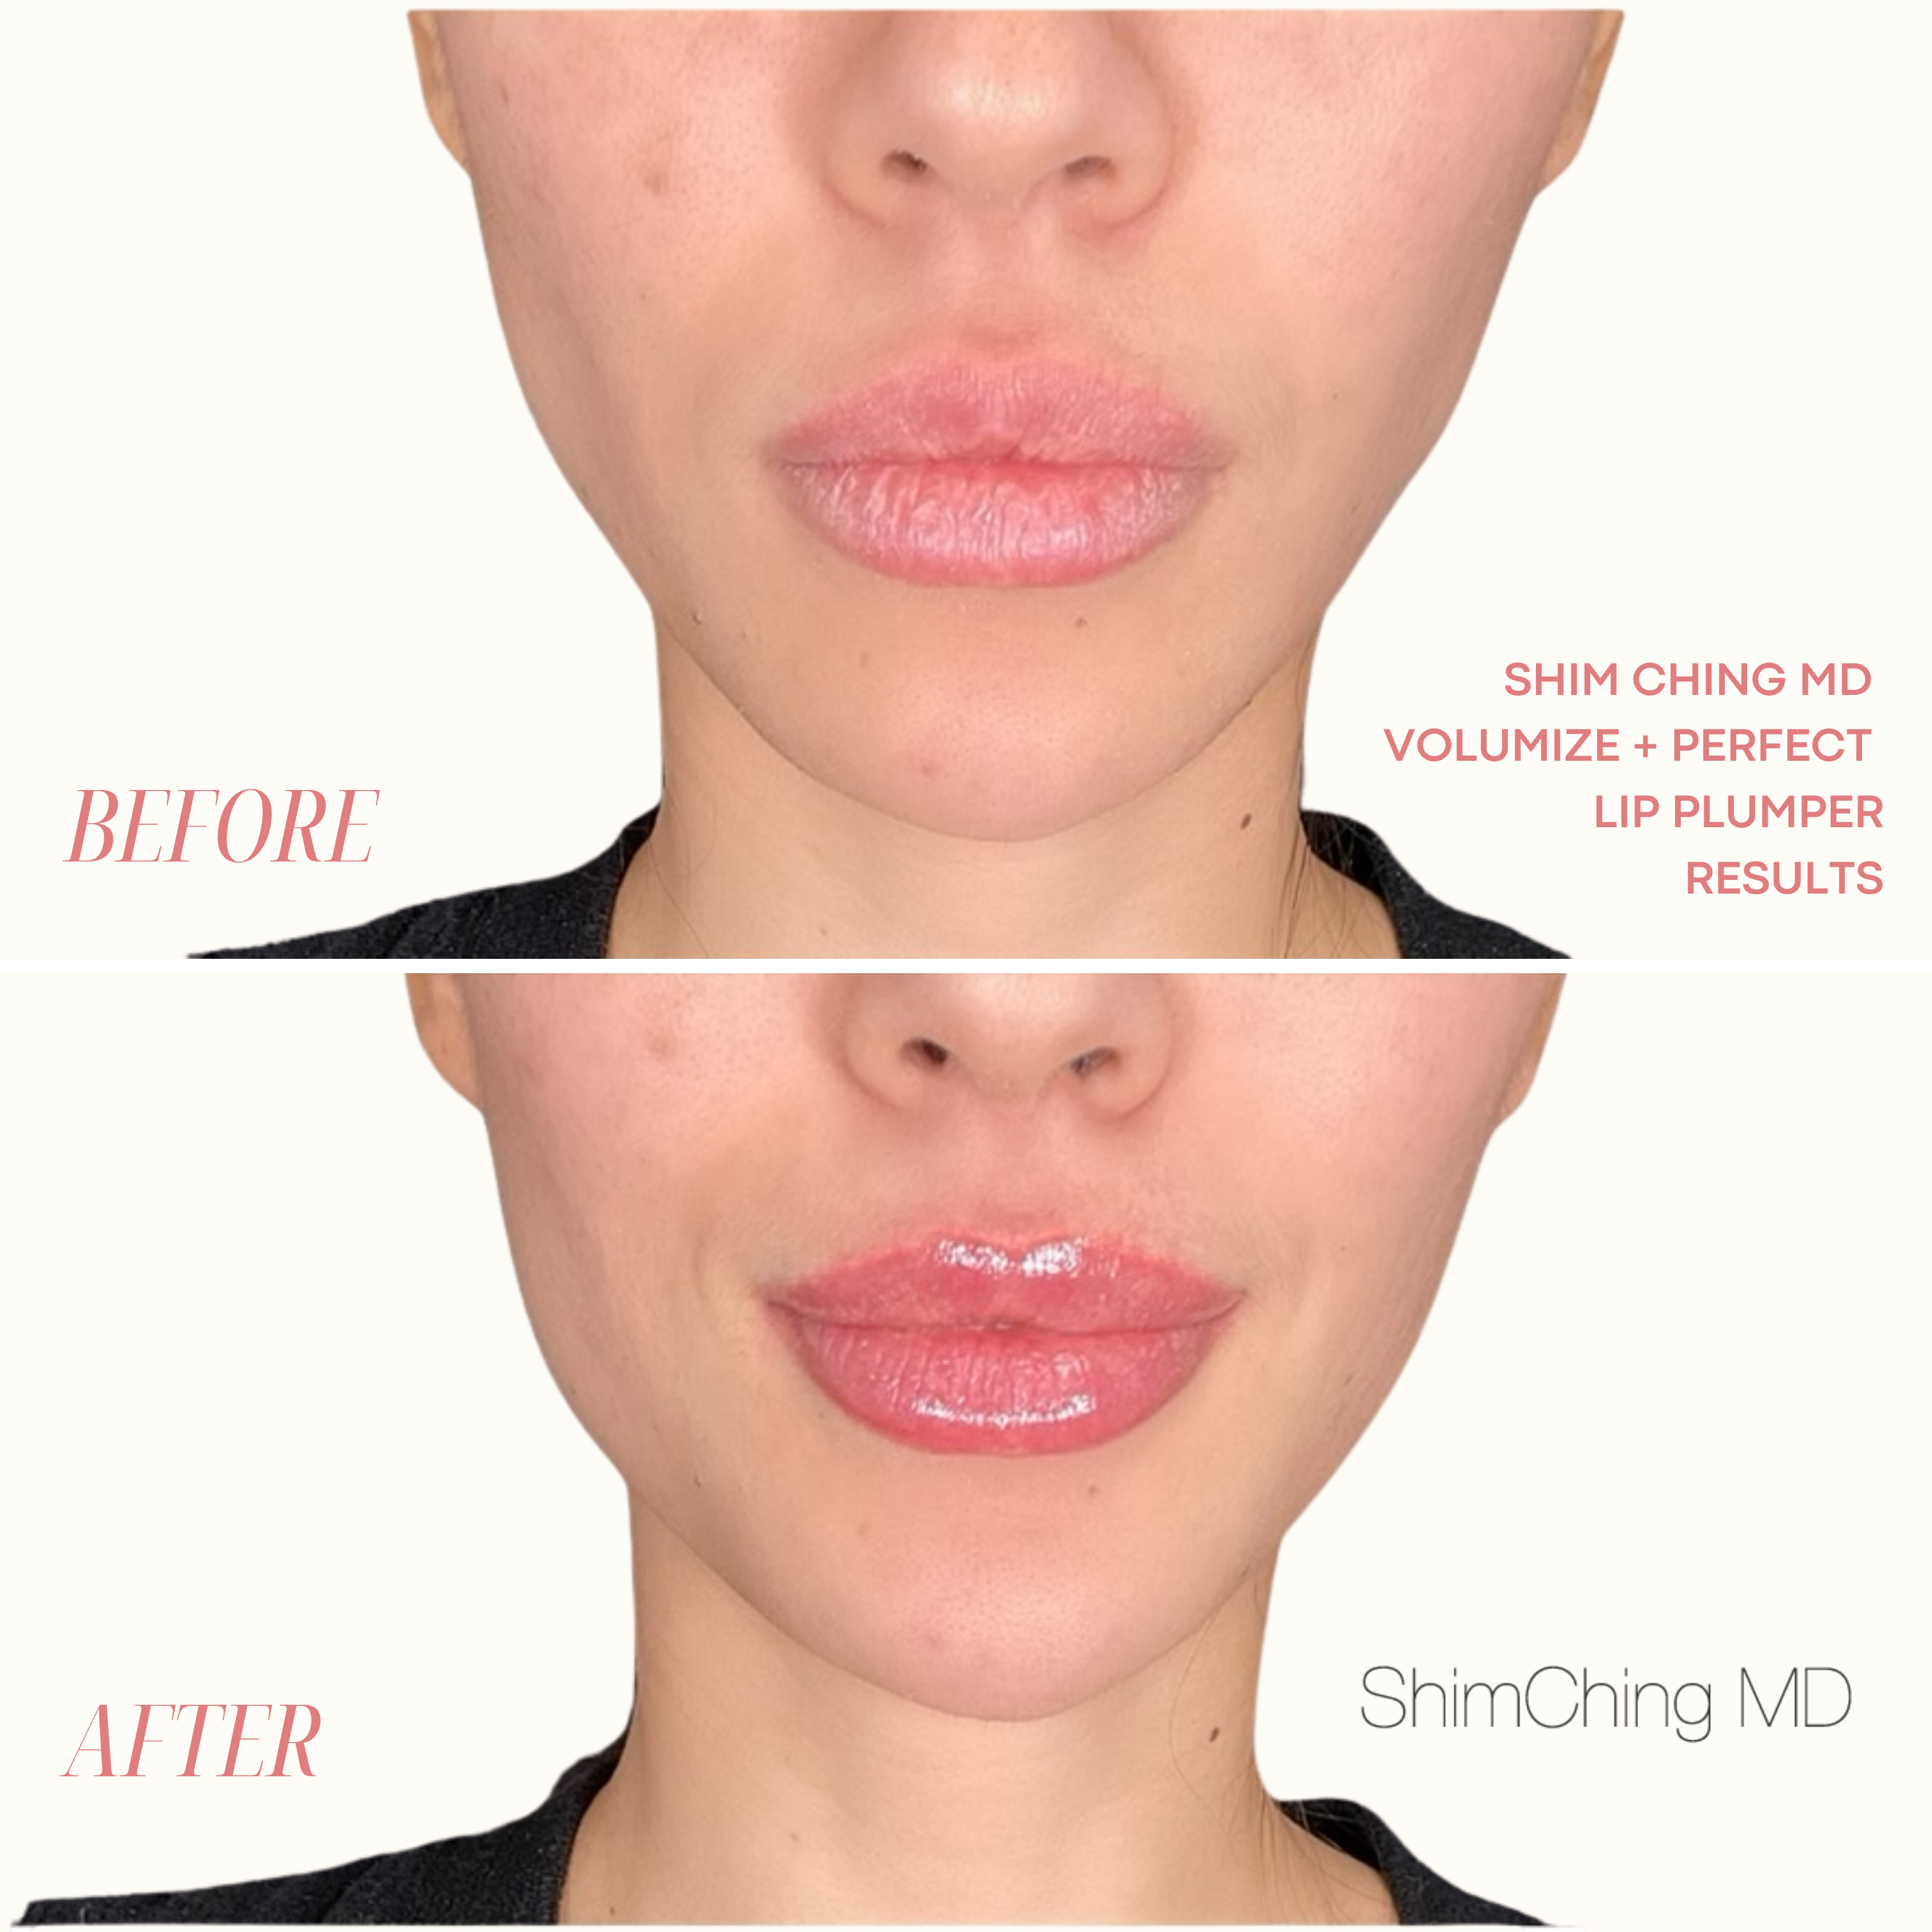 Shim Ching MD Lip Plumper - 25% OFF Intro Special